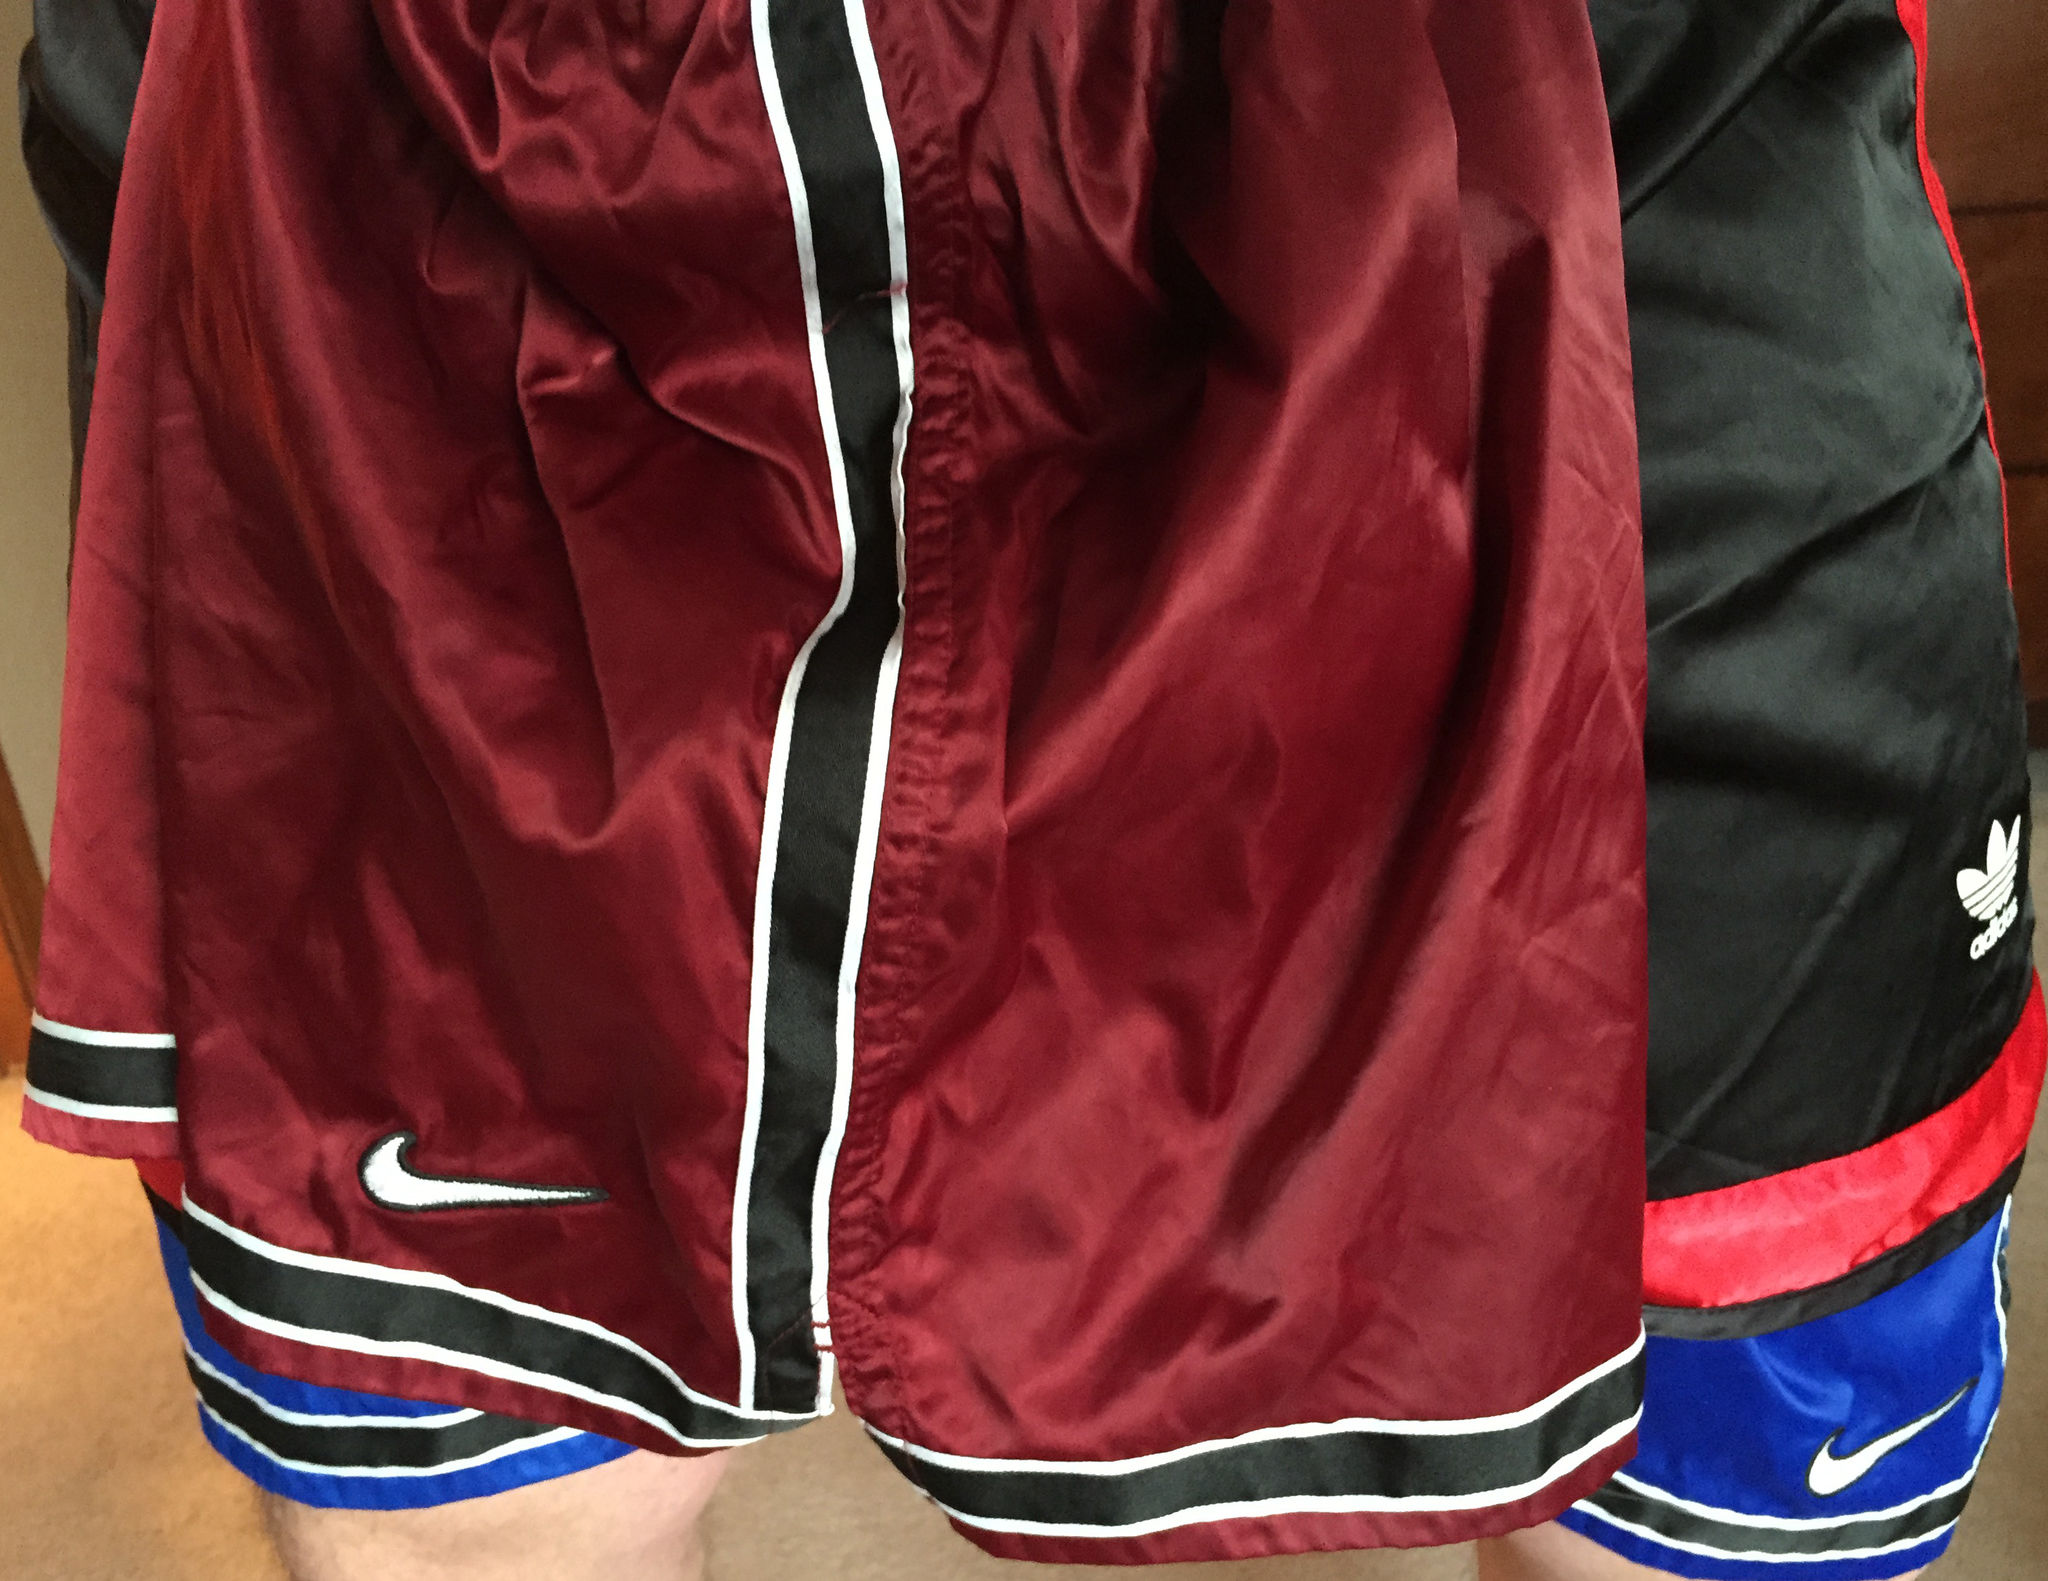 Maroon shorts - pretty awesome color